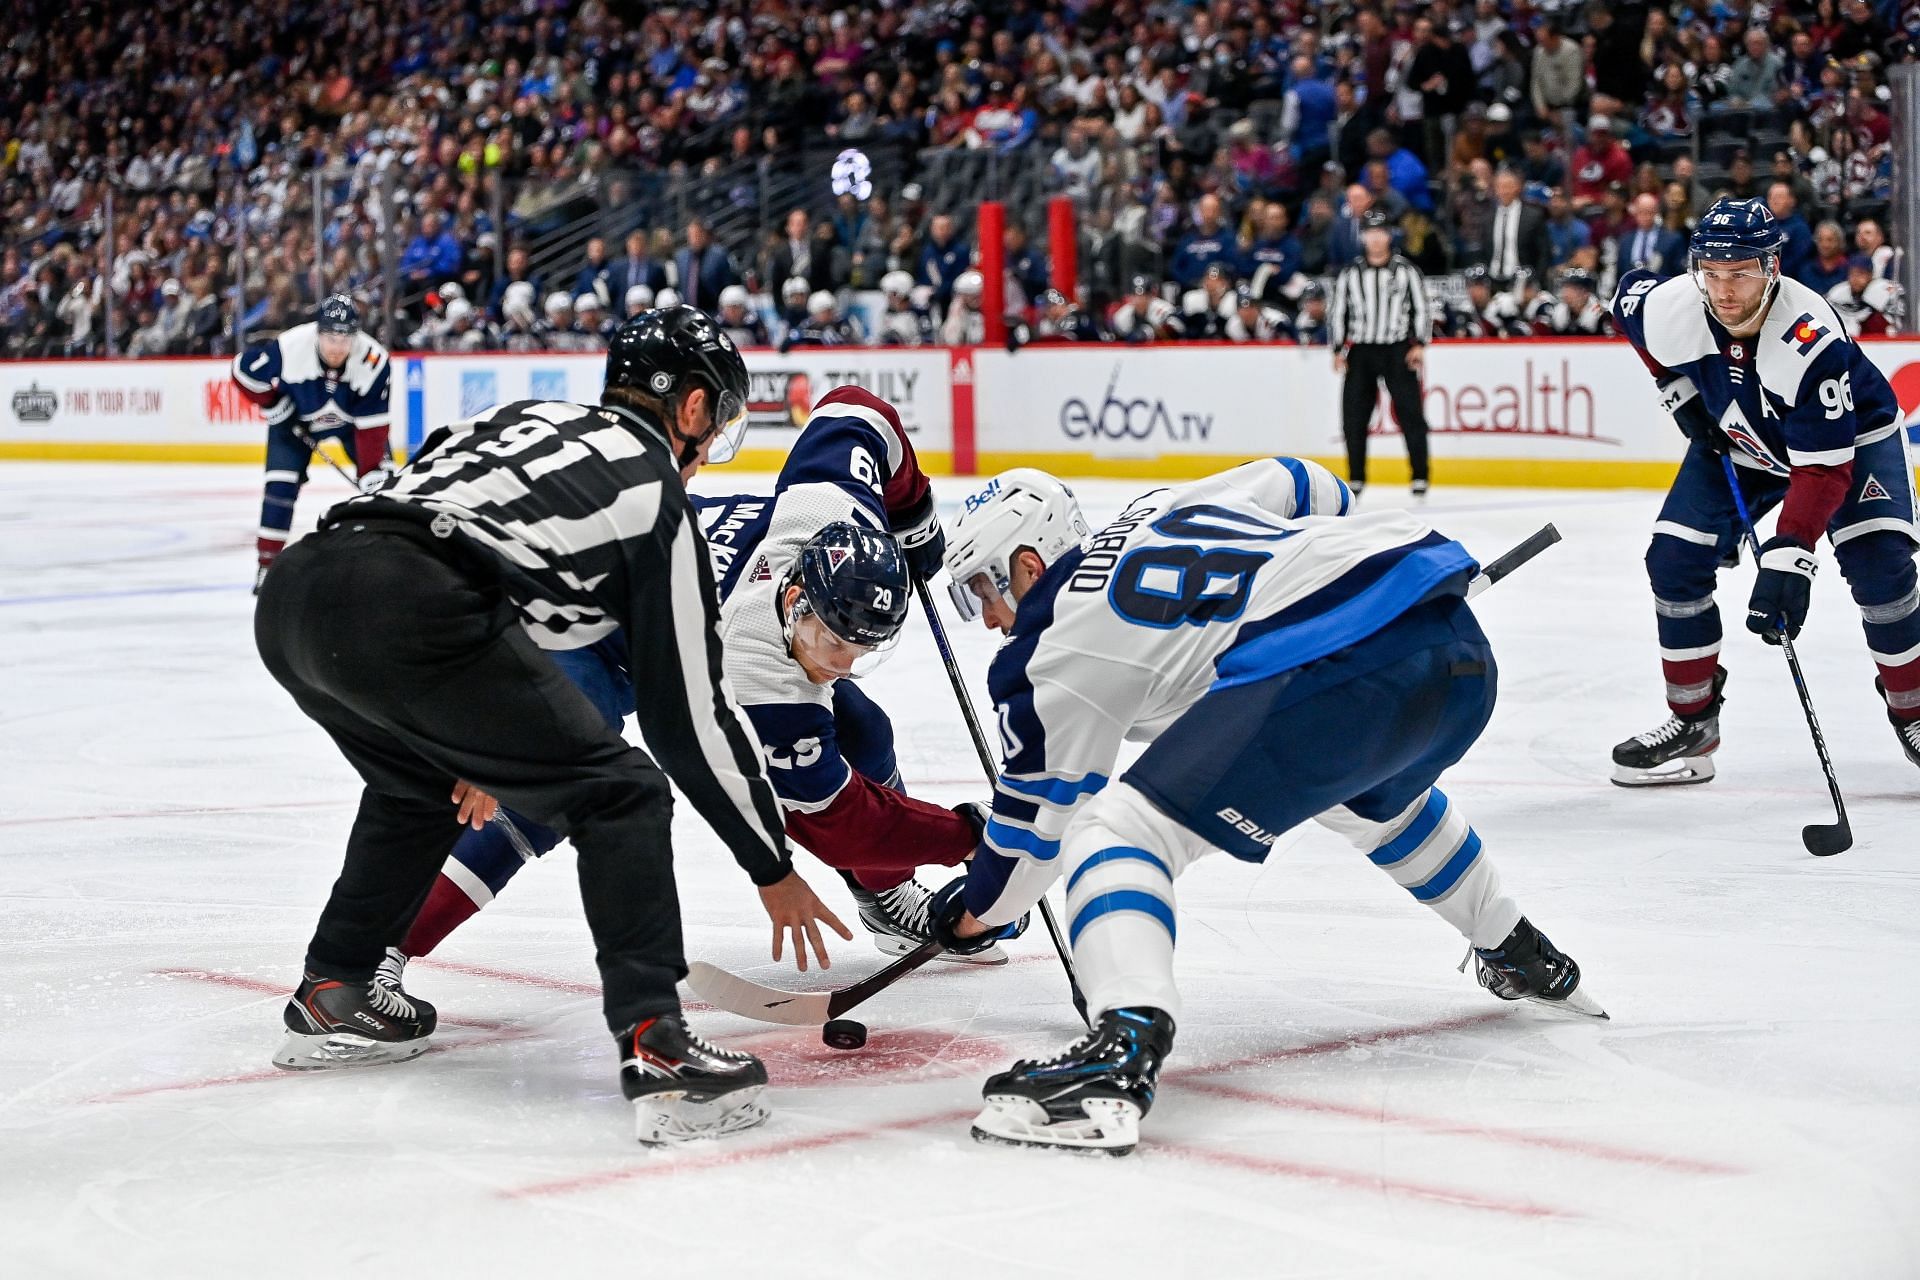 Colorado Avalanche vs Winnipeg Jets How and where to watch NHL live streaming on TV, channel list and more